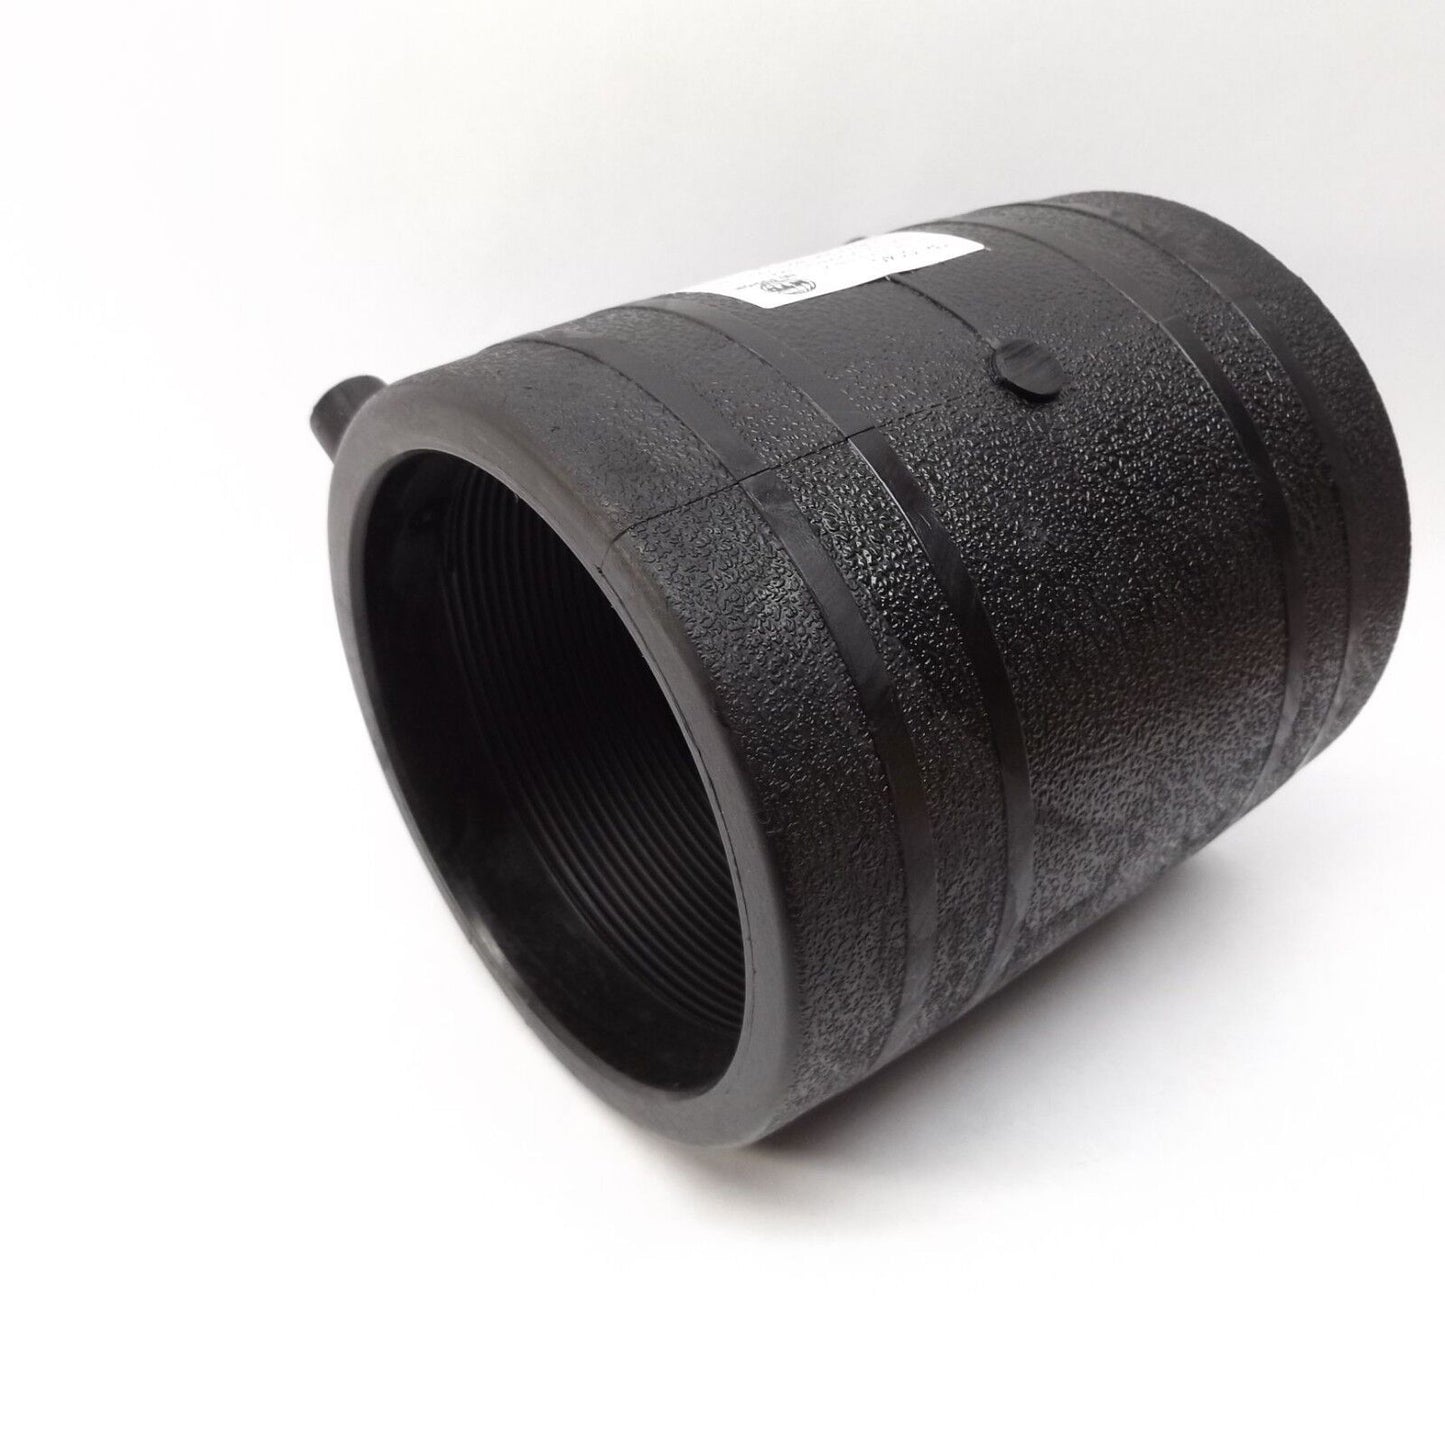 EF PIPE COUPLING TRI 0140 EF CPLG, 4IPS, BLK ELECTRO-FUSION COUPLING